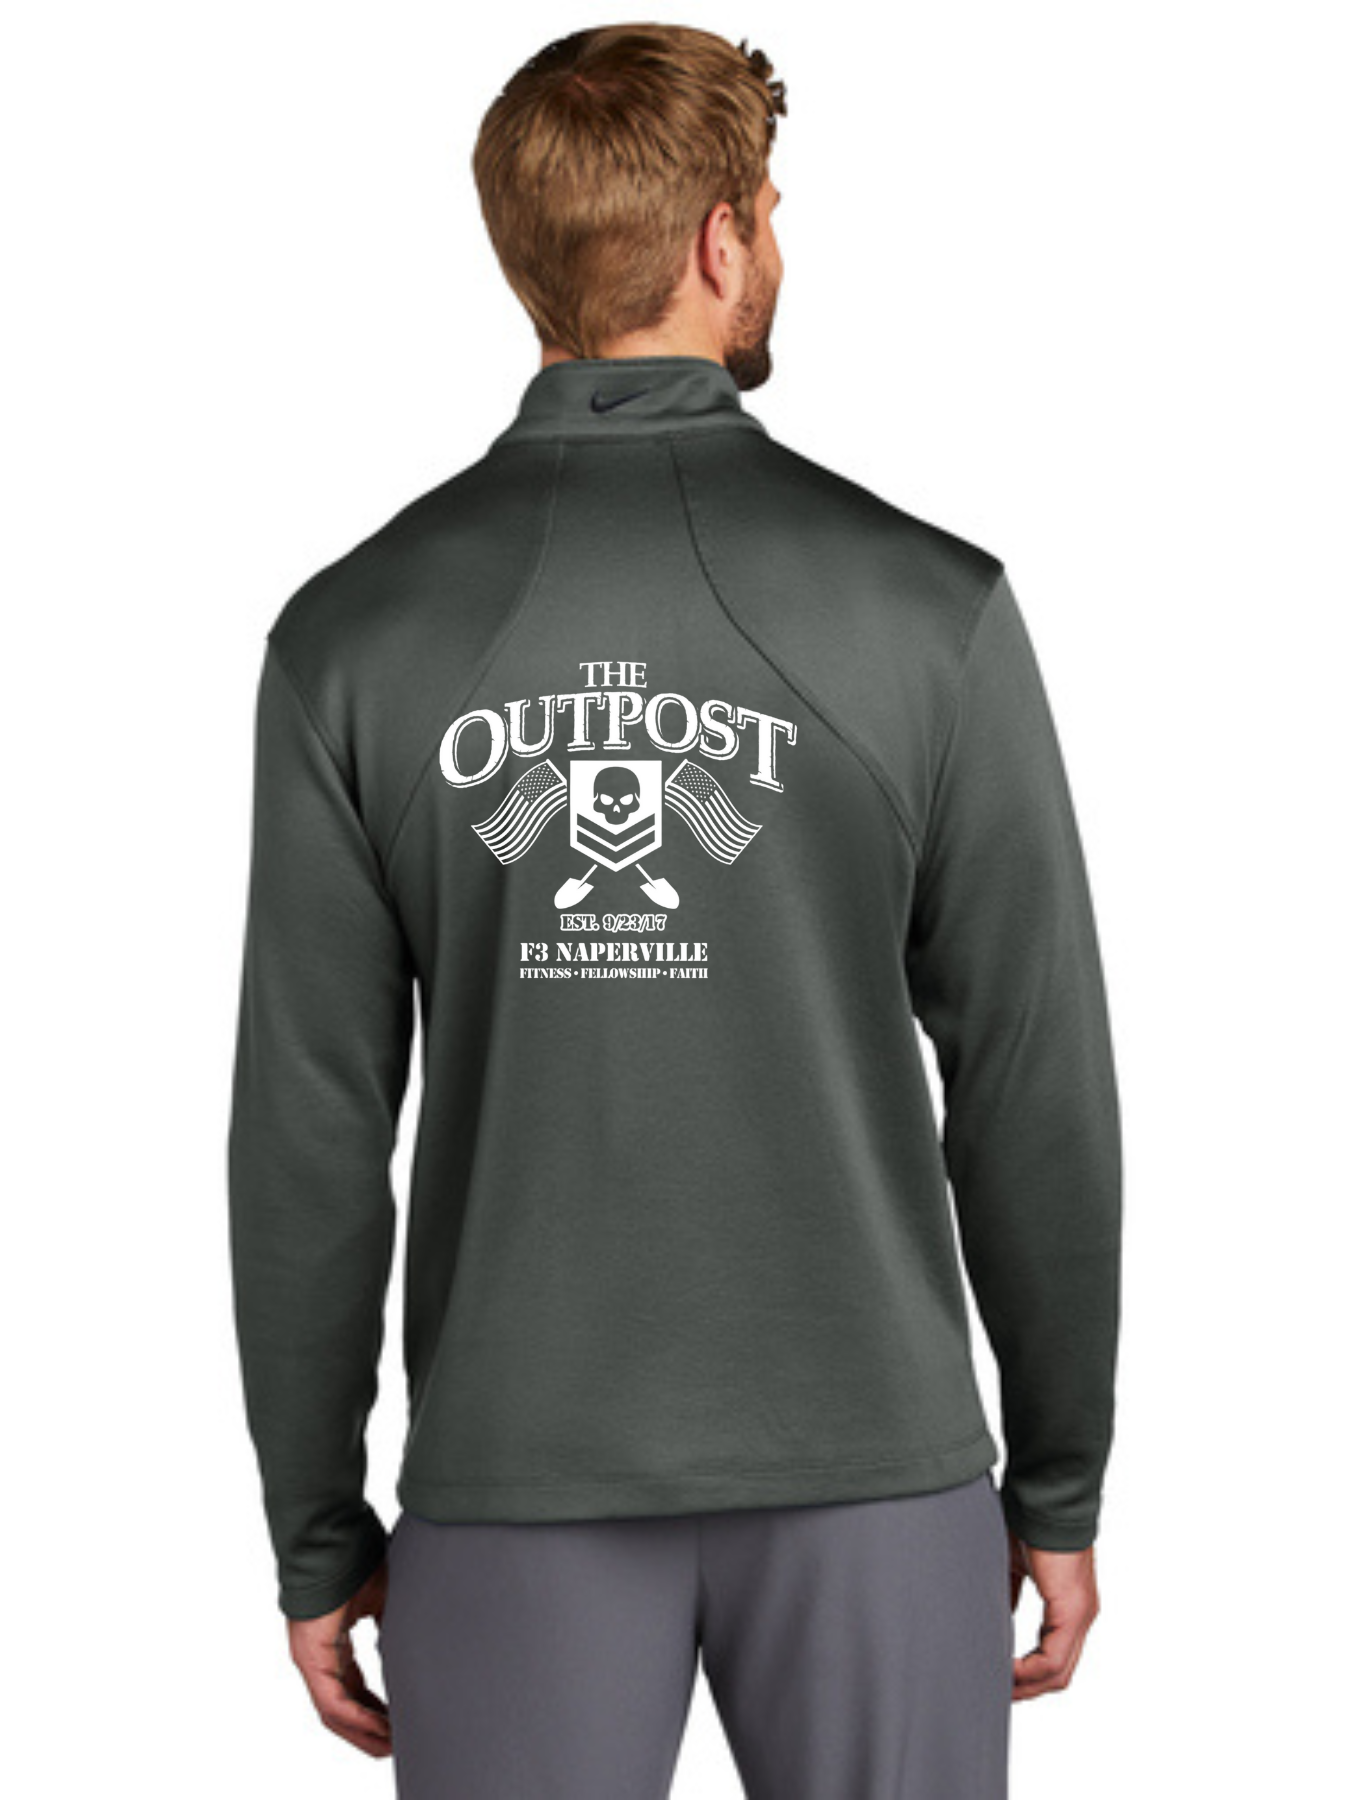 F3 Naperville The Outpost Pre-Order October 2022